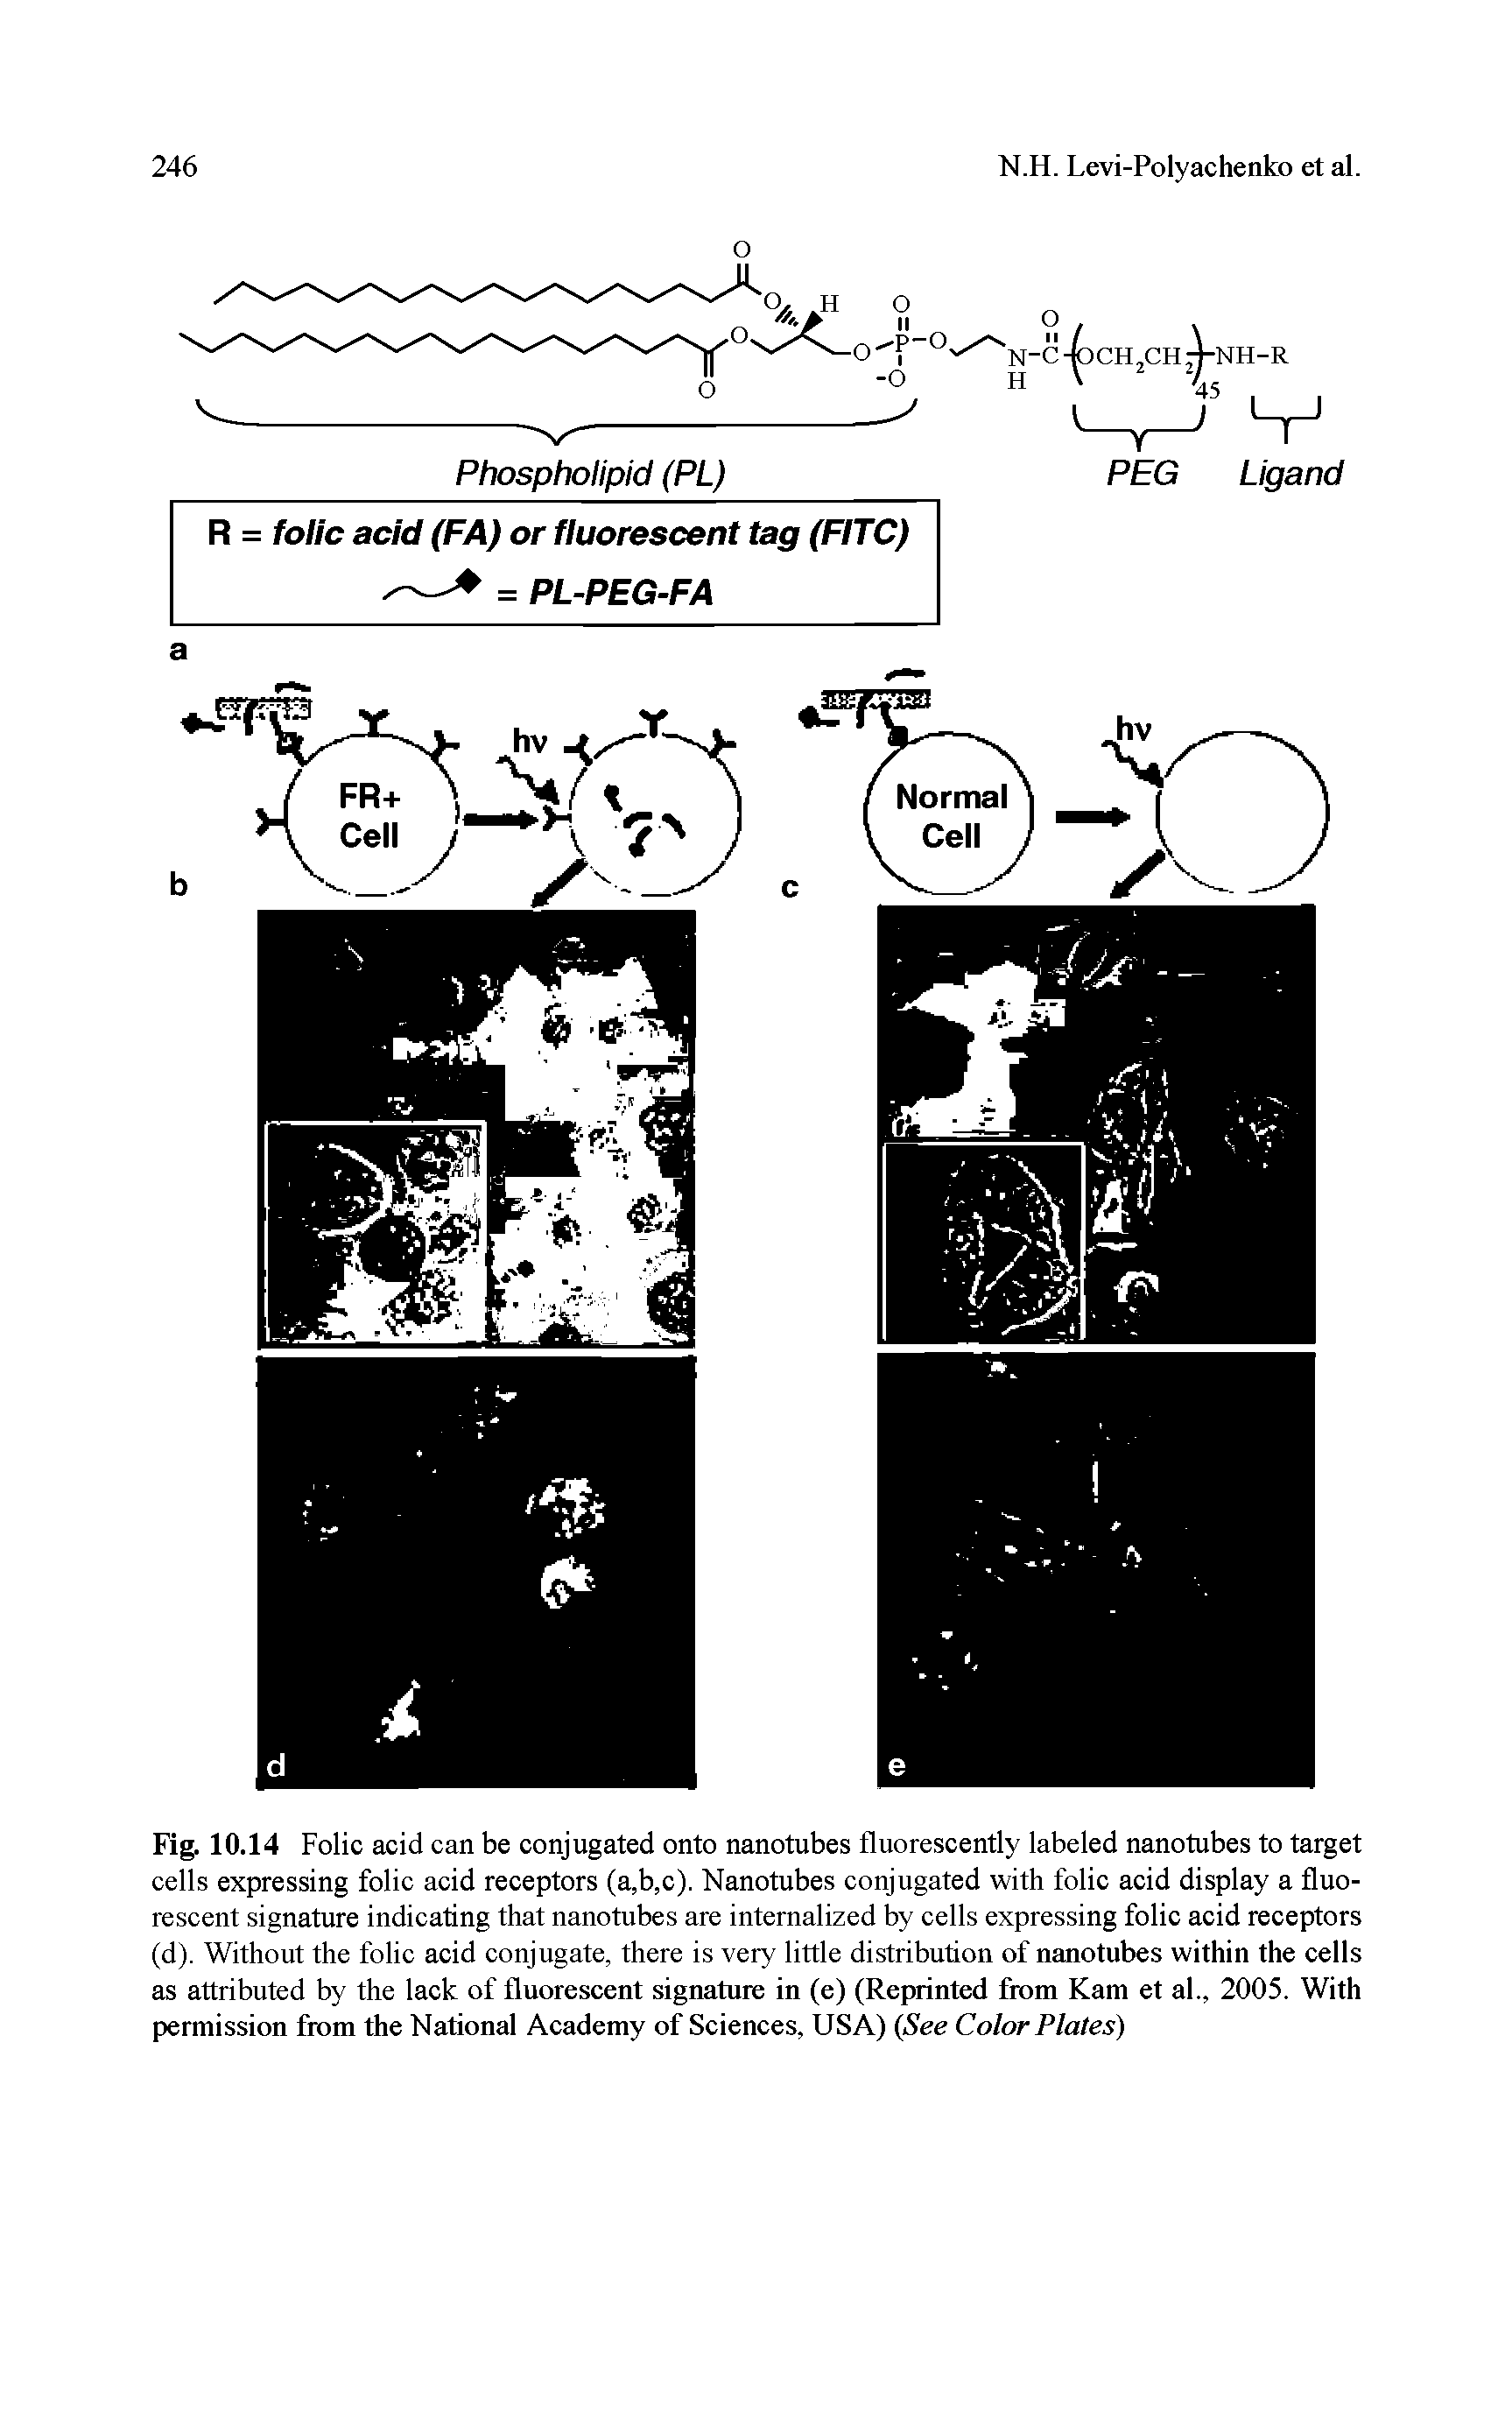 Fig. 10.14 Folic acid can be conjugated onto nanotubes fluorescently labeled nanotubes to target cells expressing folic acid receptors (a,b,c). Nanotubes conjugated with folic acid display a fluorescent signature indicating that nanotubes are internalized by cells expressing folic acid receptors (d). Without the folic acid conjugate, there is very little distribution of nanotubes within the cells as attributed by the lack of fluorescent signature in (e) (Reprinted from Kam et al., 2005. With permission from the National Academy of Sciences, USA) (See Color Plates)...